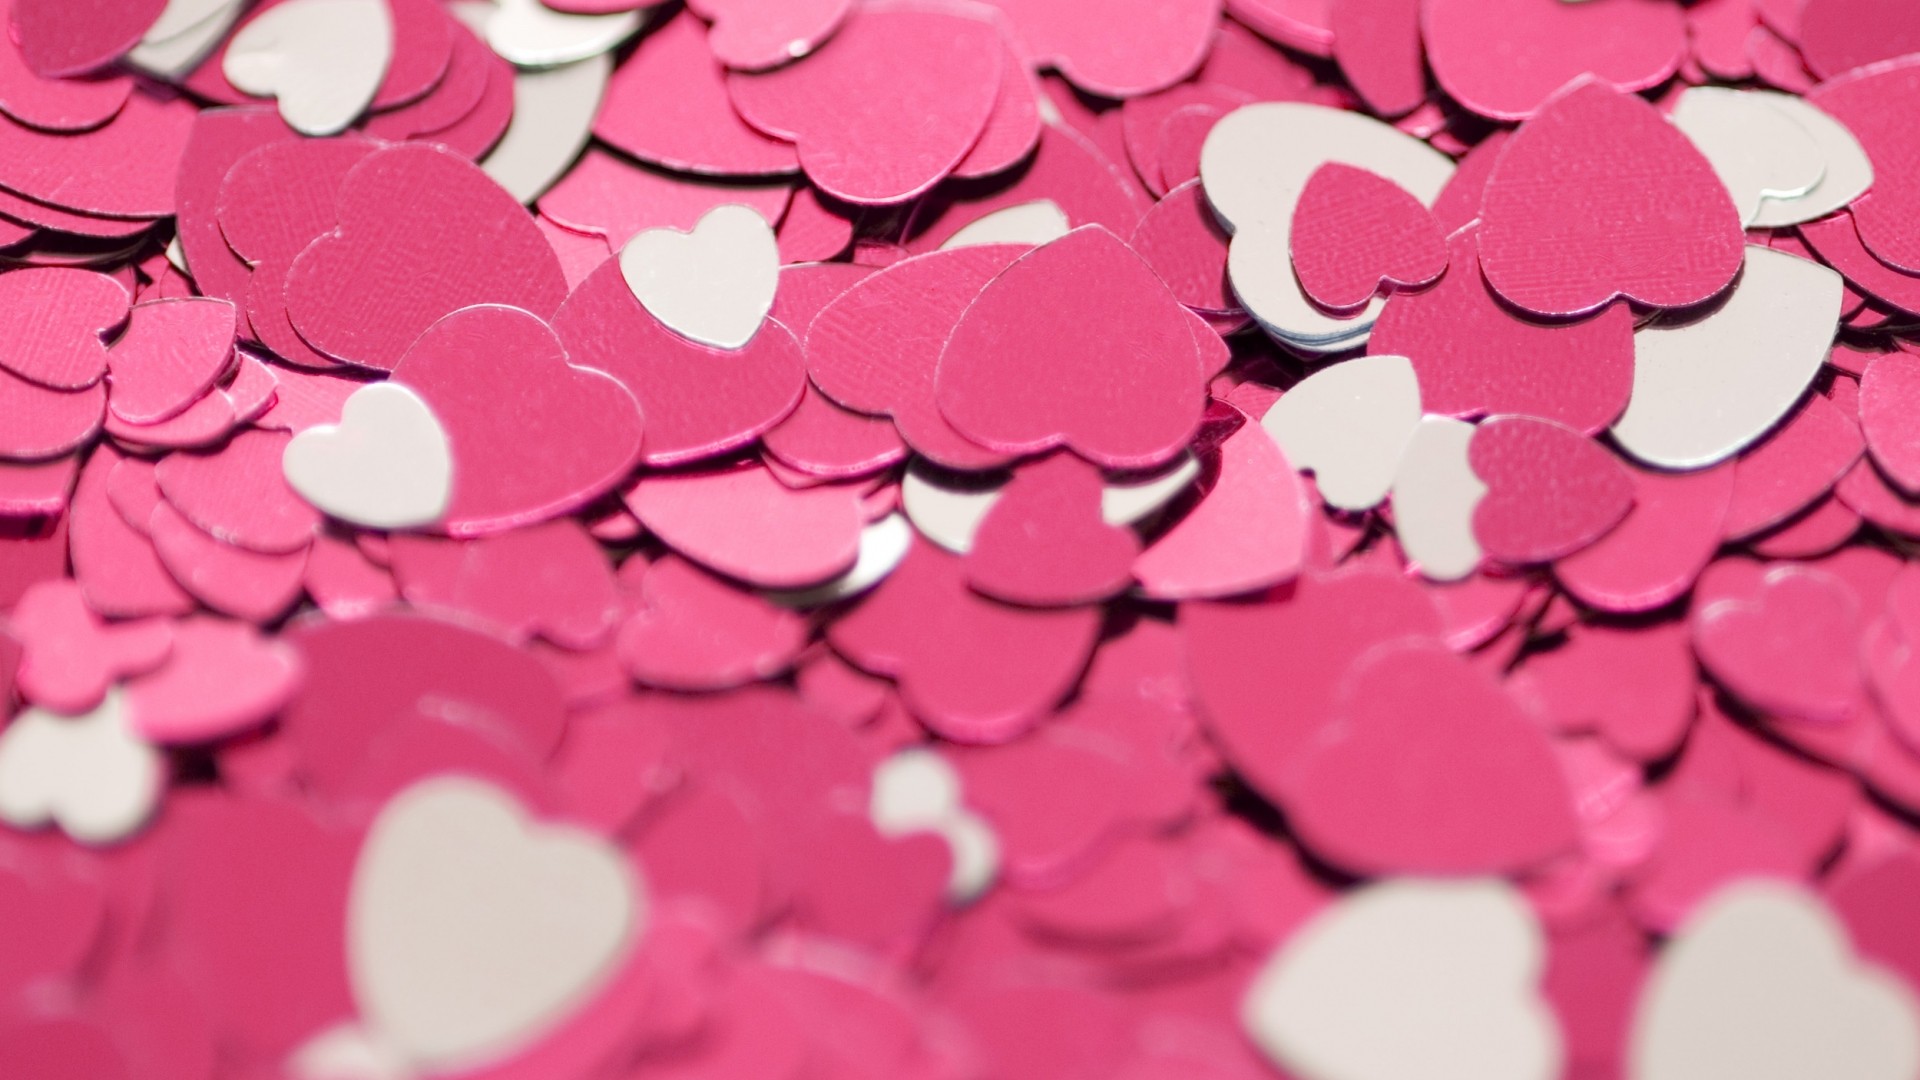 Pink Heart Background